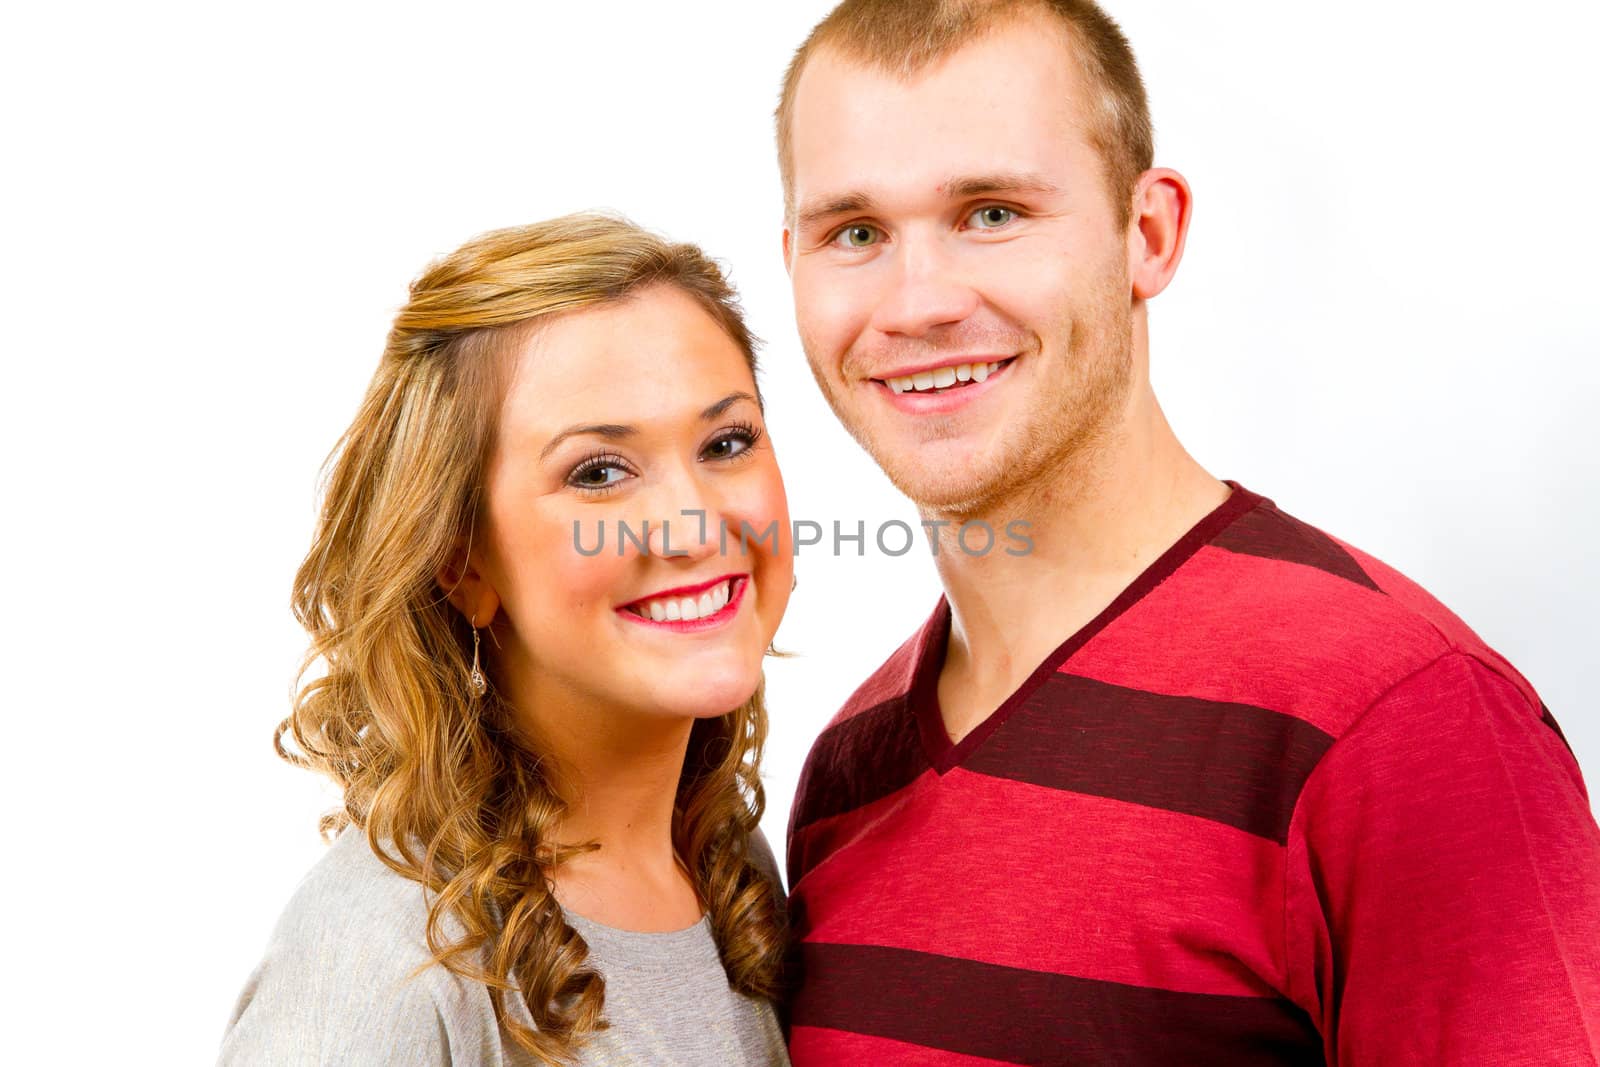 An attractive couple against a white background in the studio to create this isolated portrait.